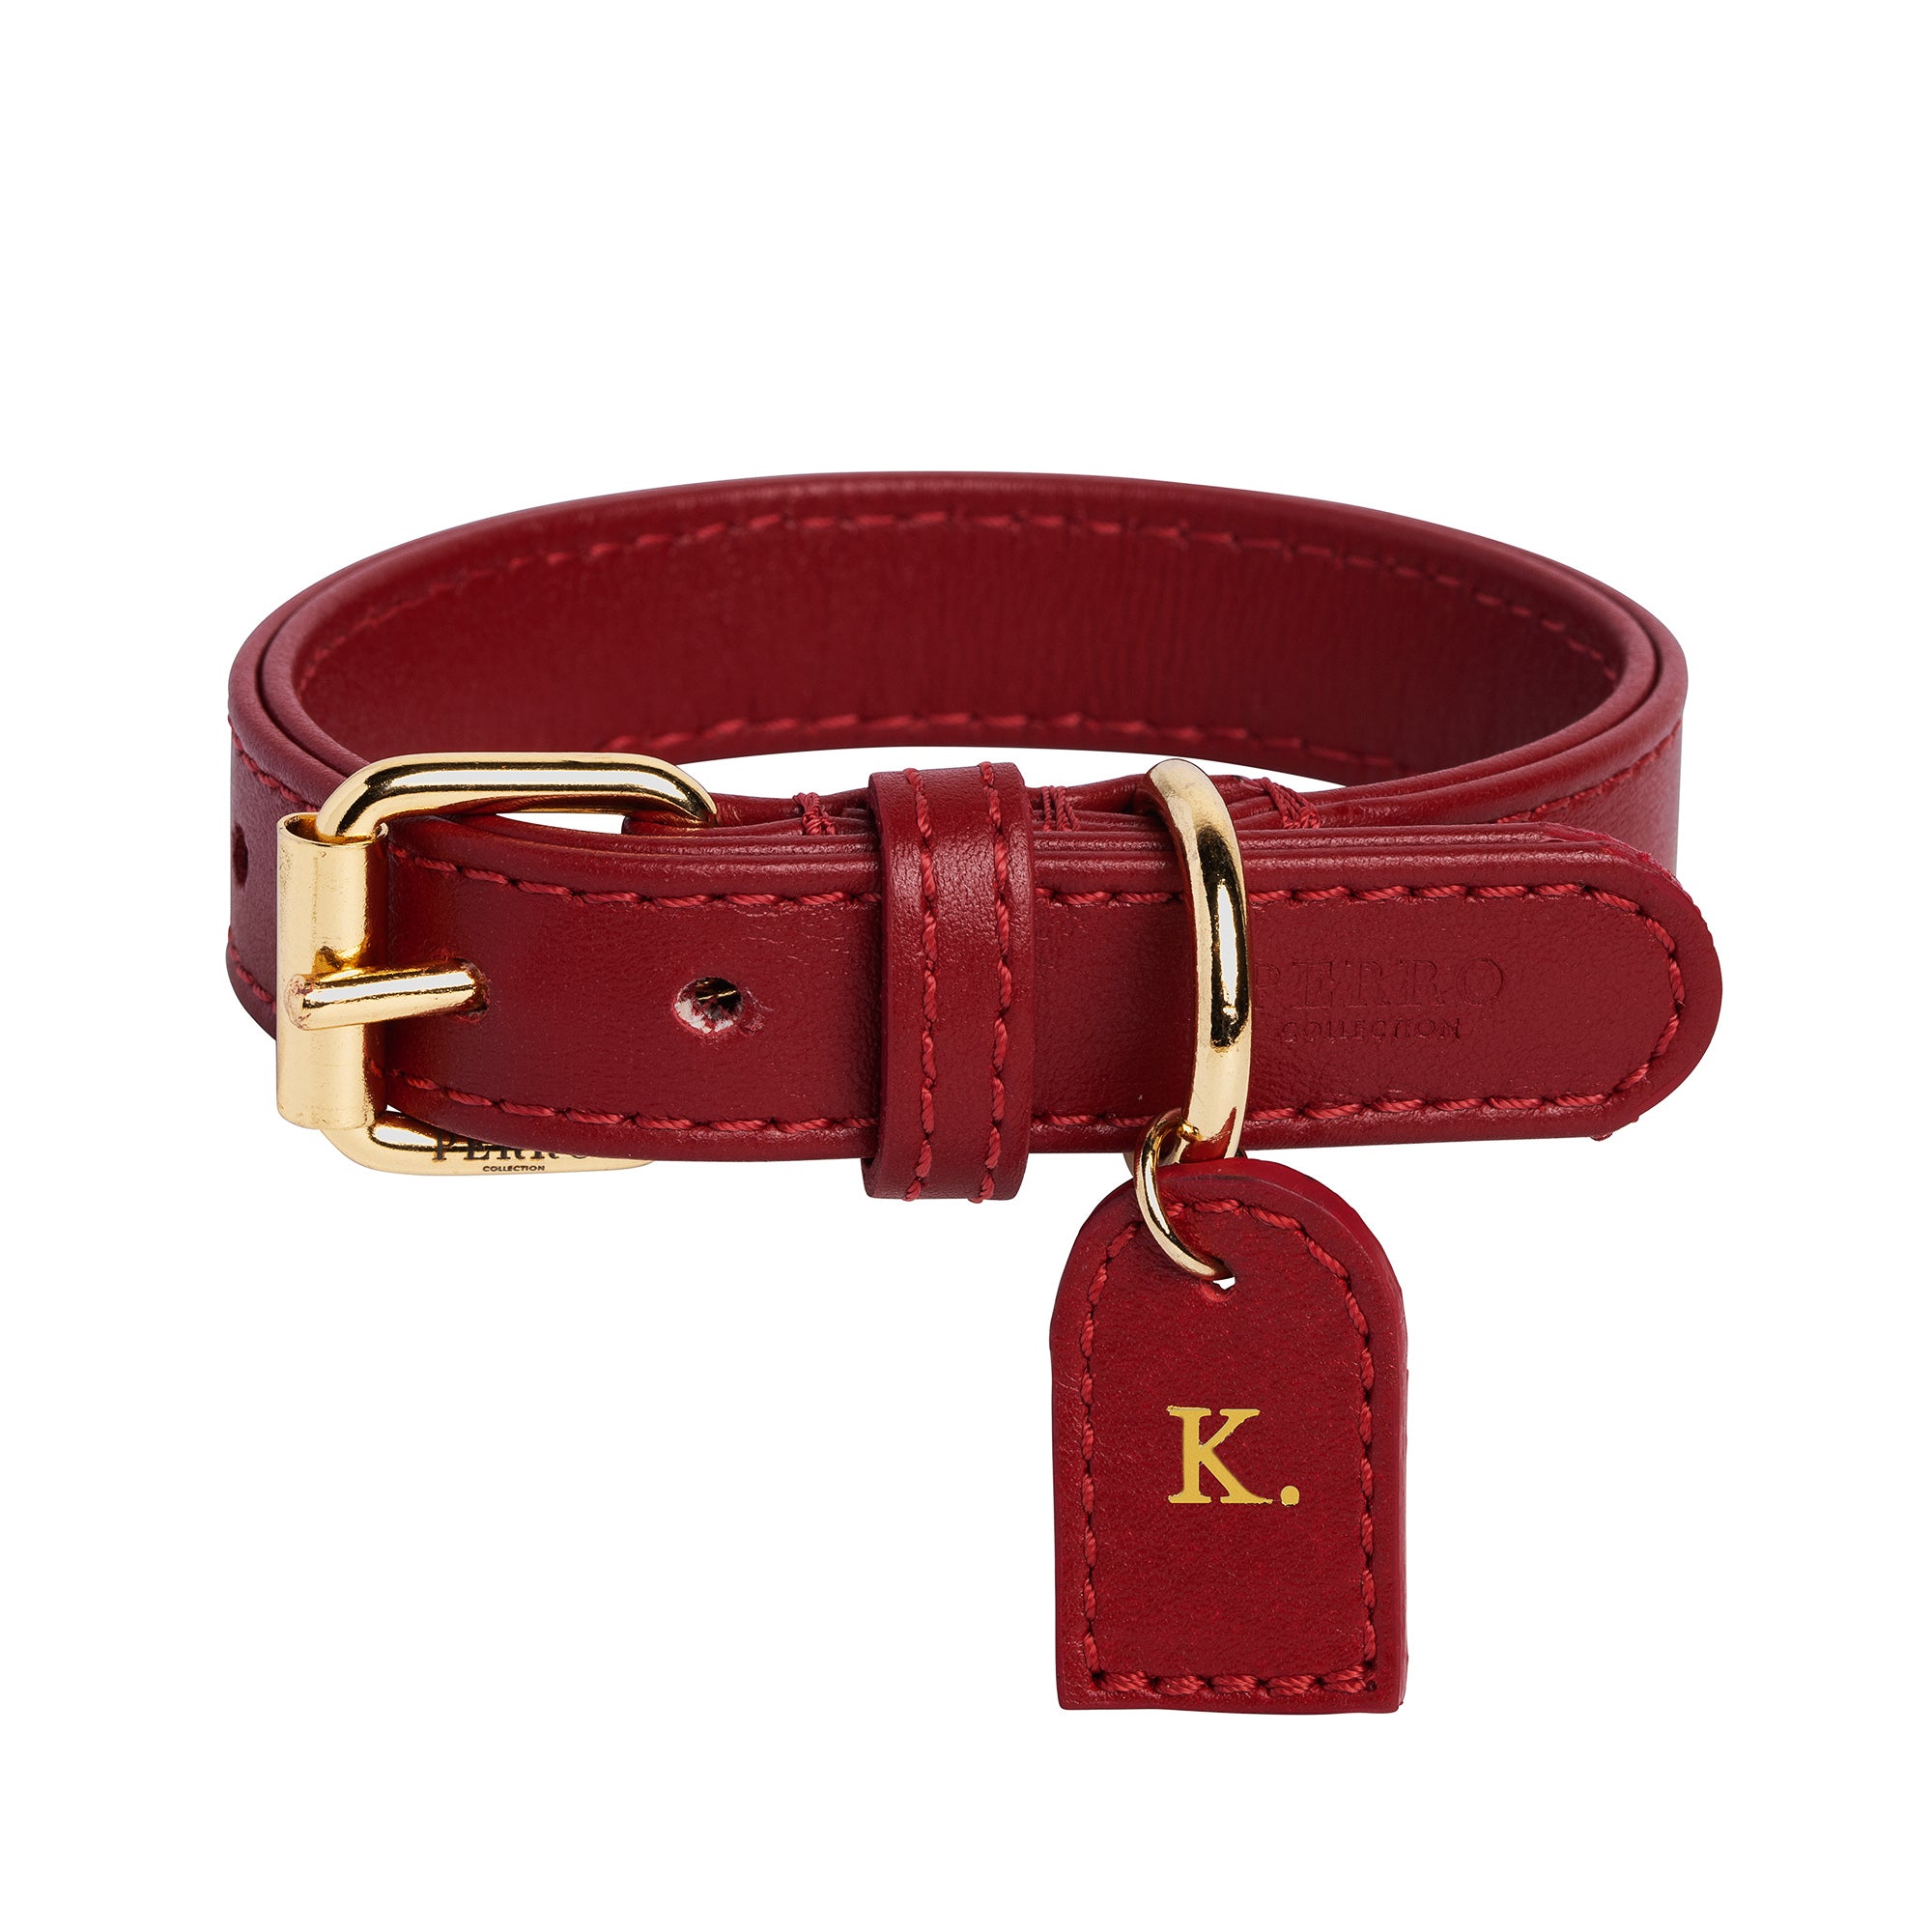 Scarlet Collar - A classic scarlet red dog collar made in Italy